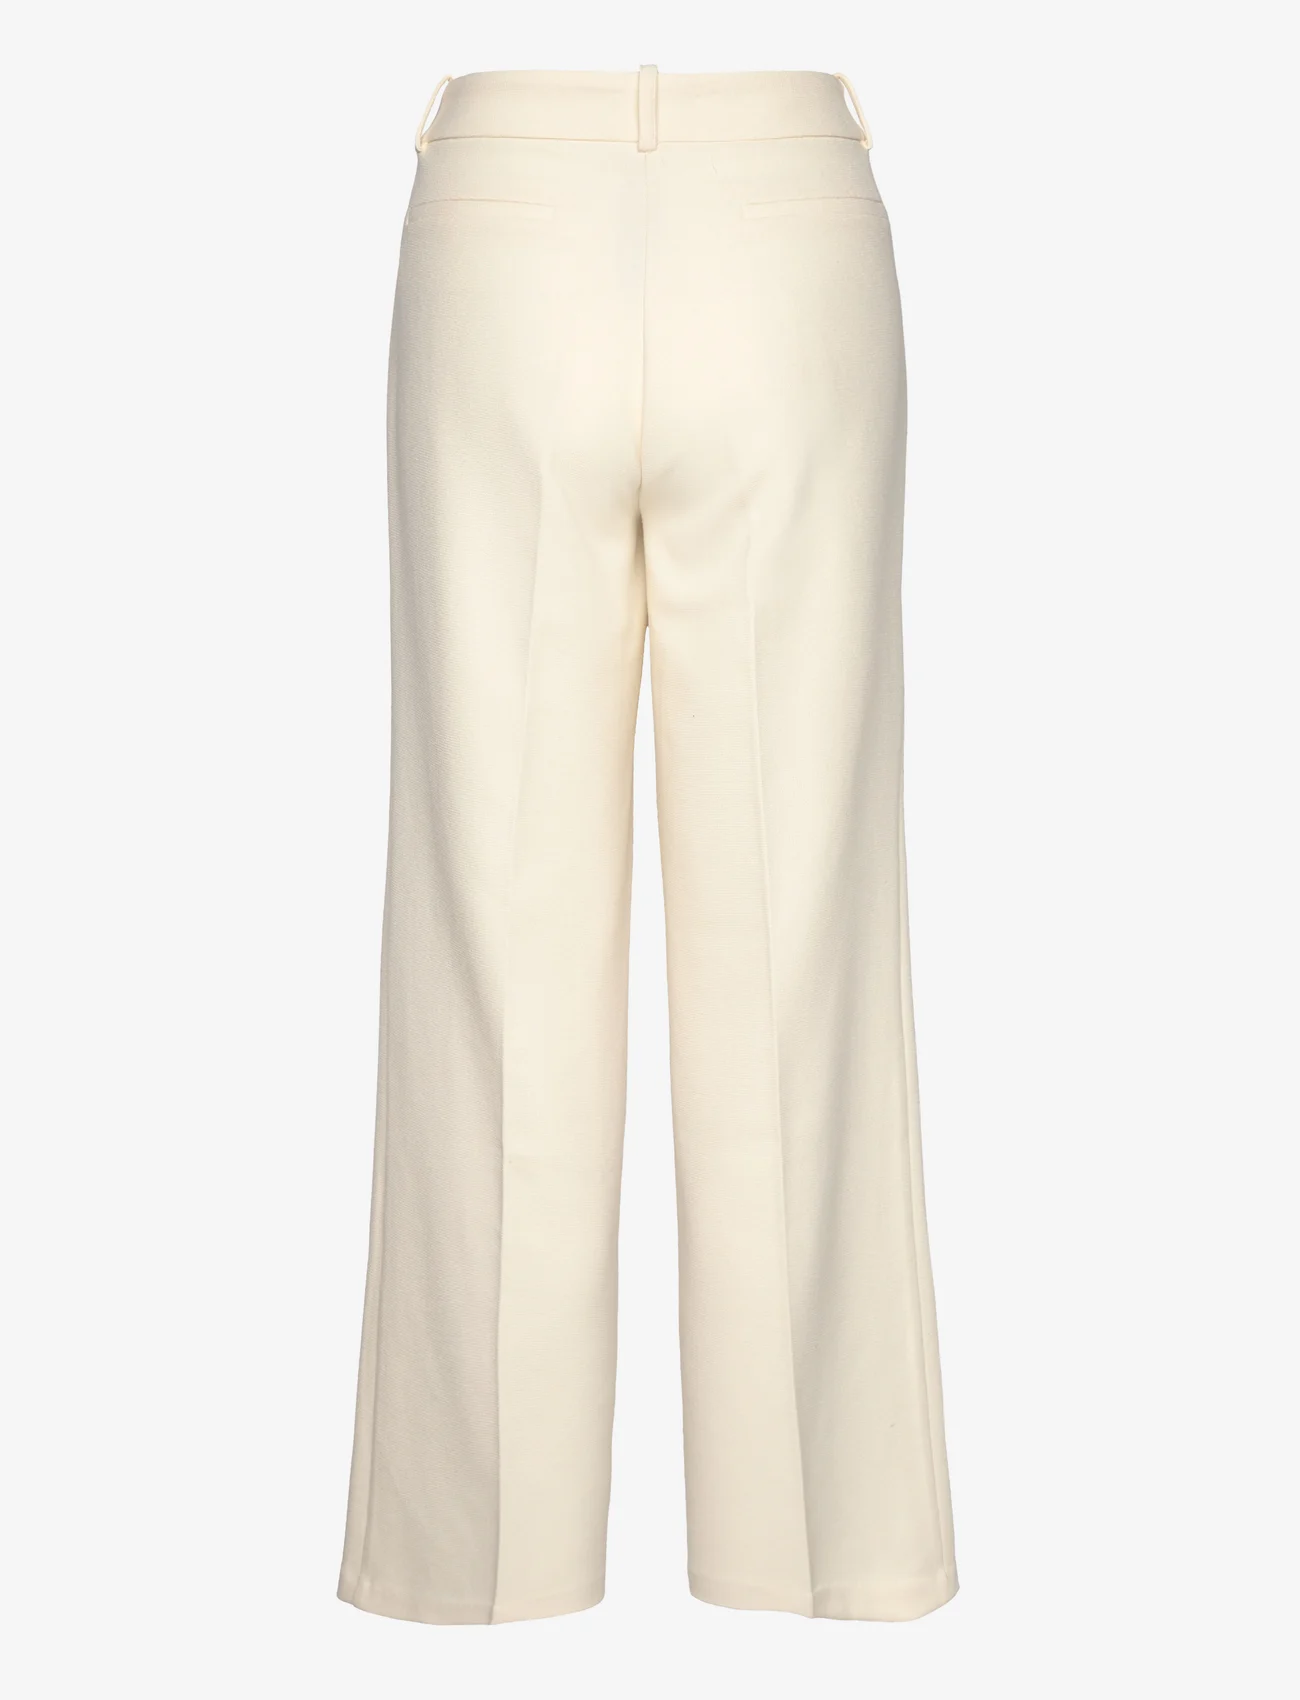 Marville Road - Ingrid Viscose Trousers - peoriided outlet-hindadega - creme - 1